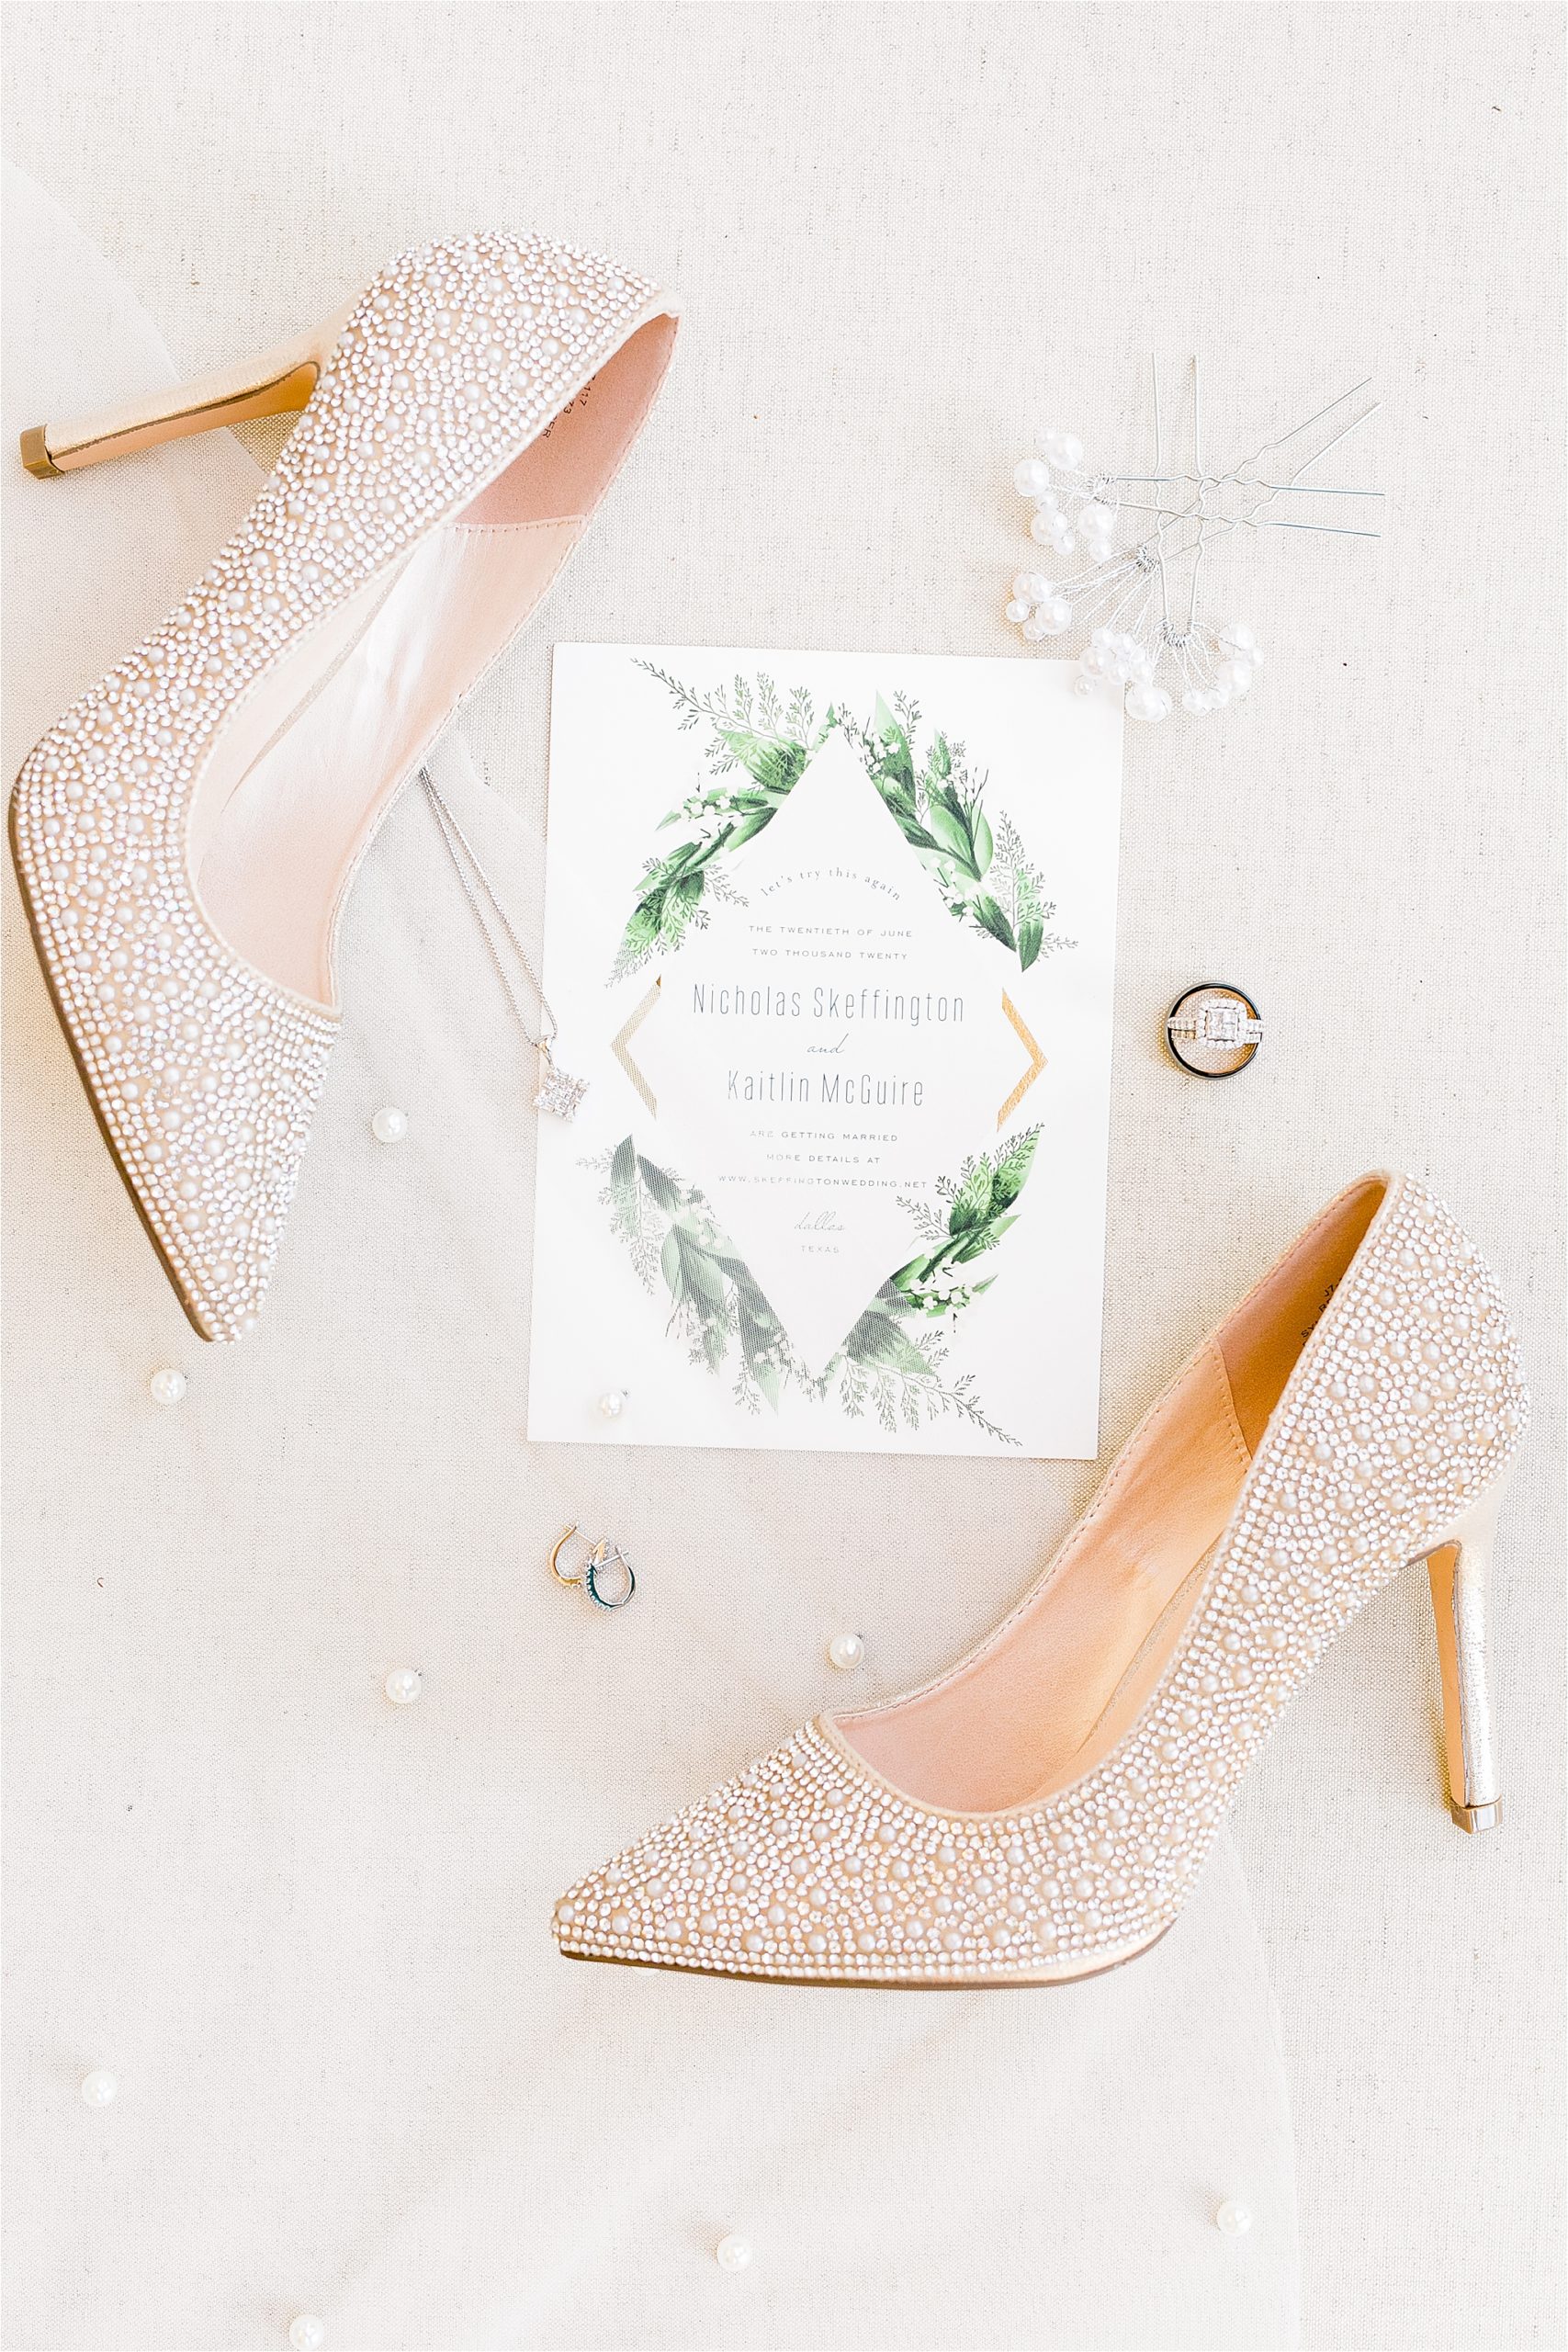 Neutral Wedding Details including the shoes, Invitation, rings and jewelry 